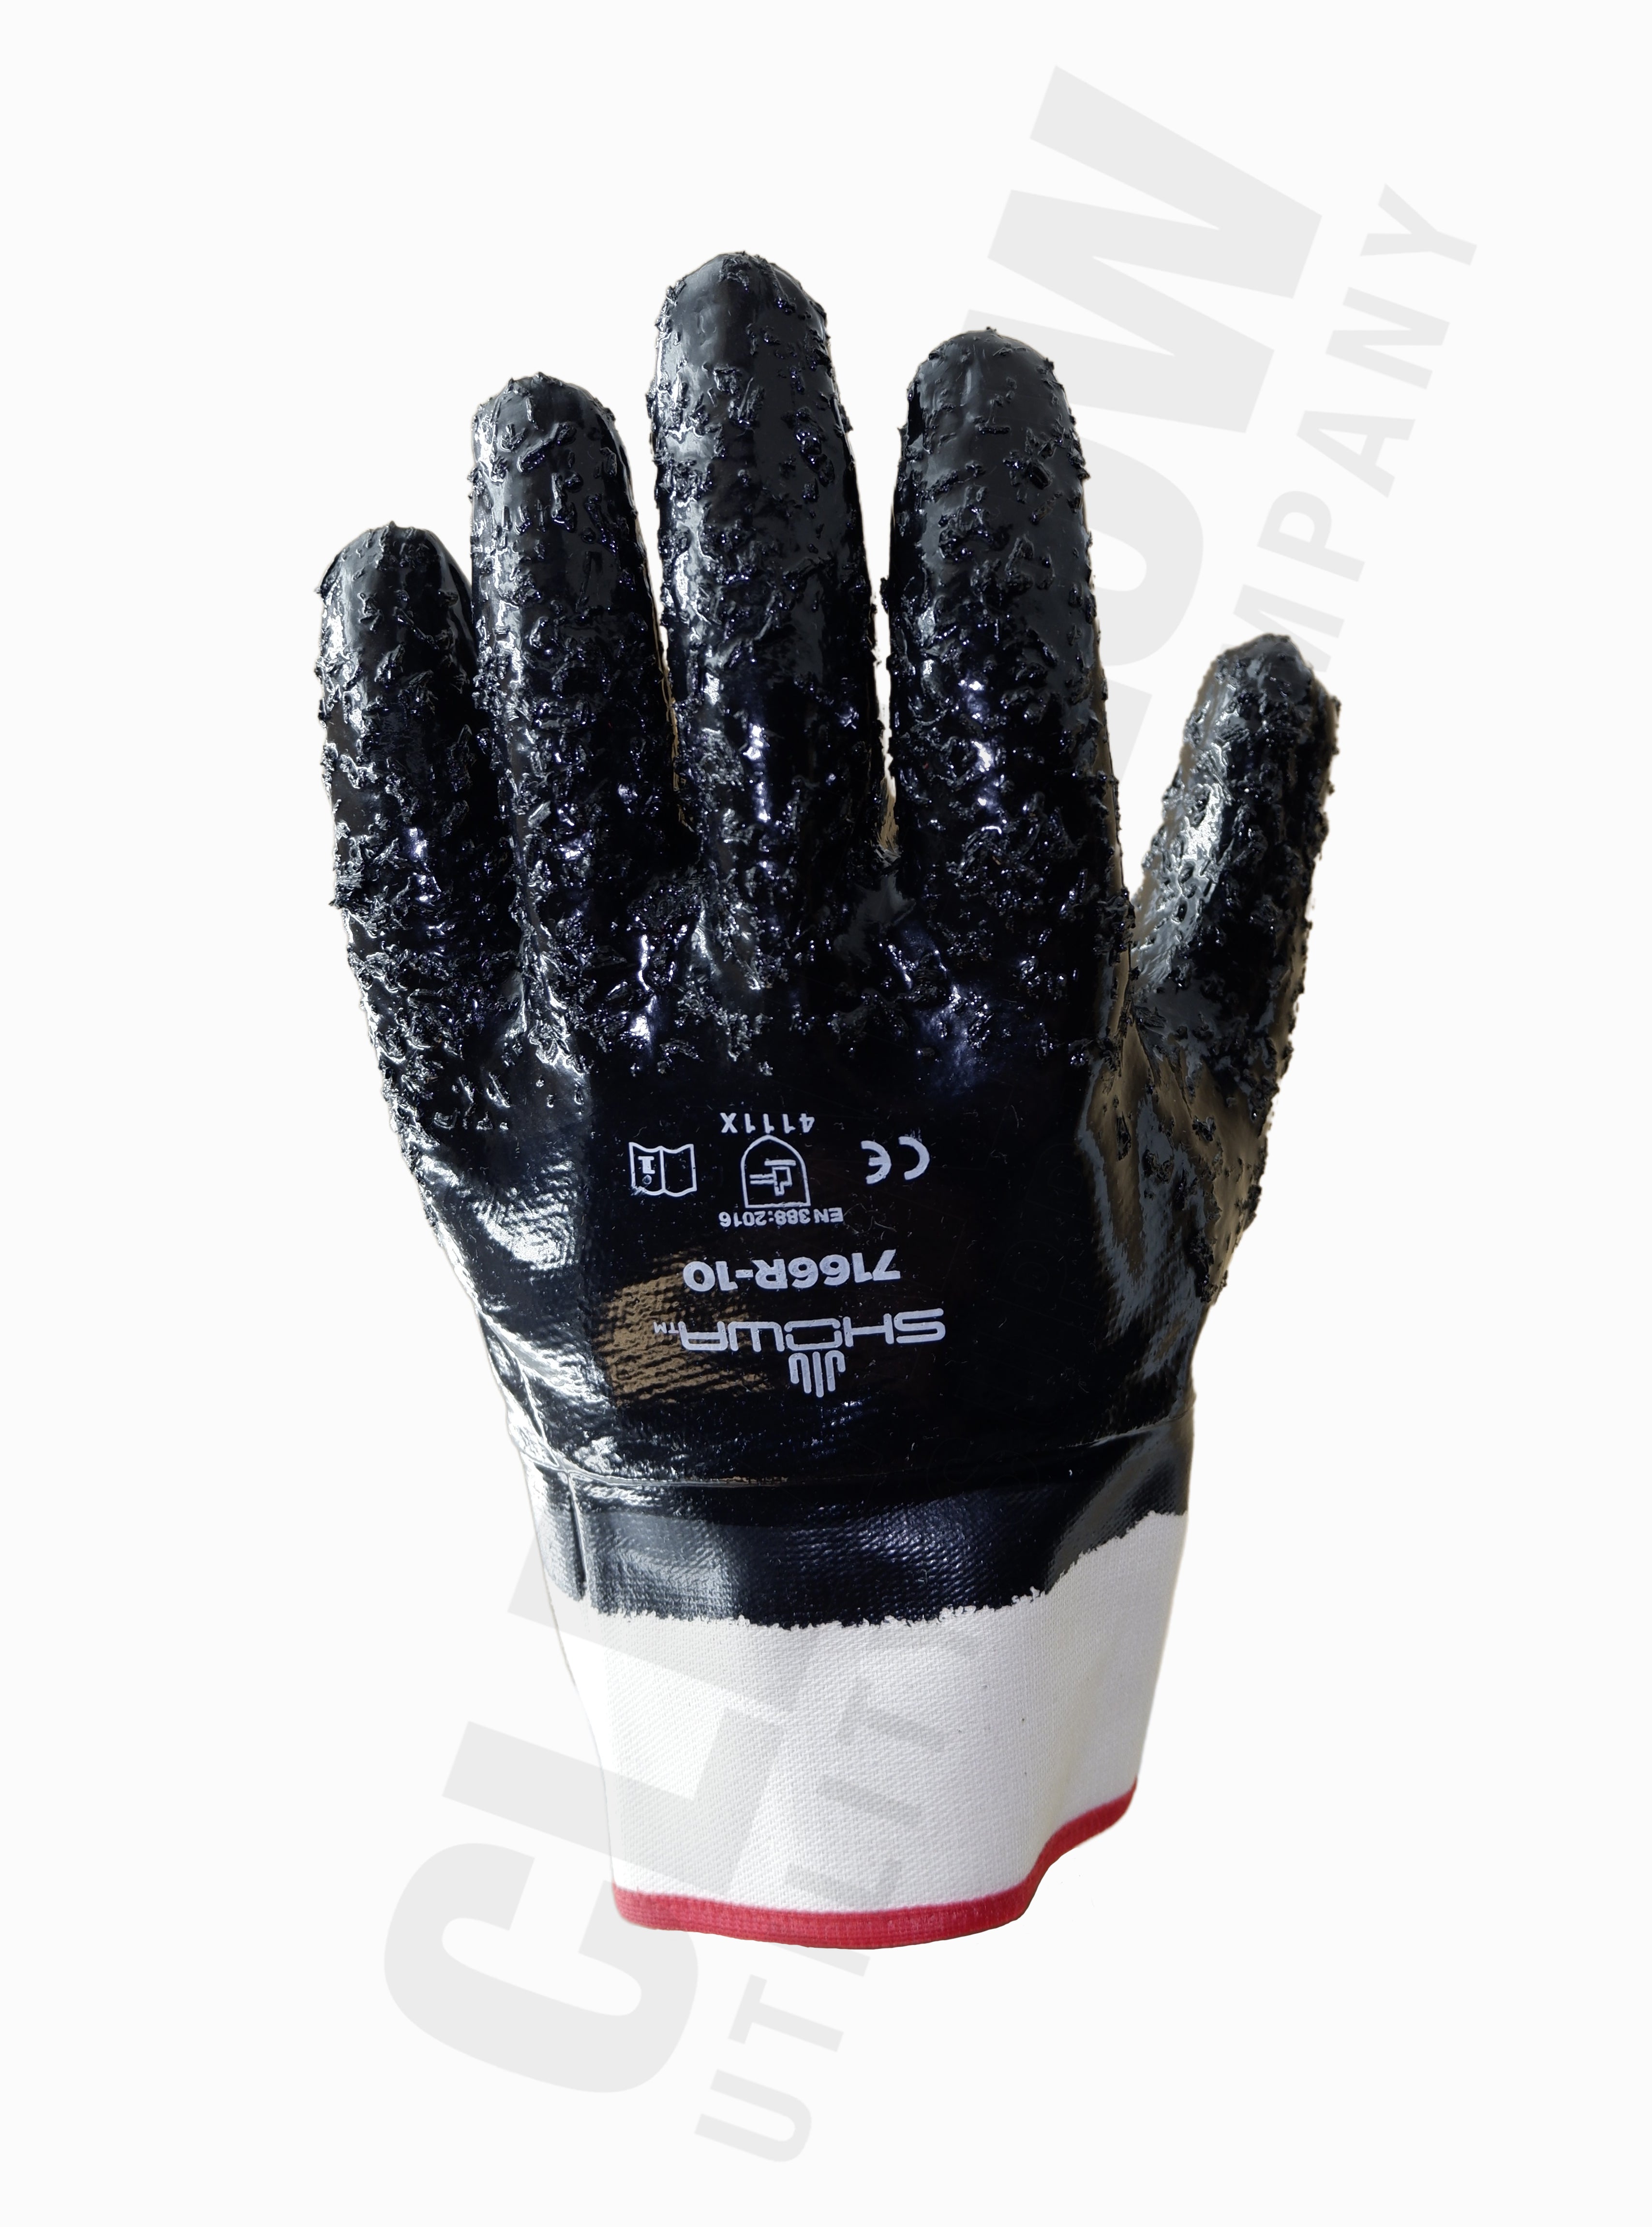 Showa 7166R Nitrile Coated Rough Grip Work Glove - Pack of 12 Pairs